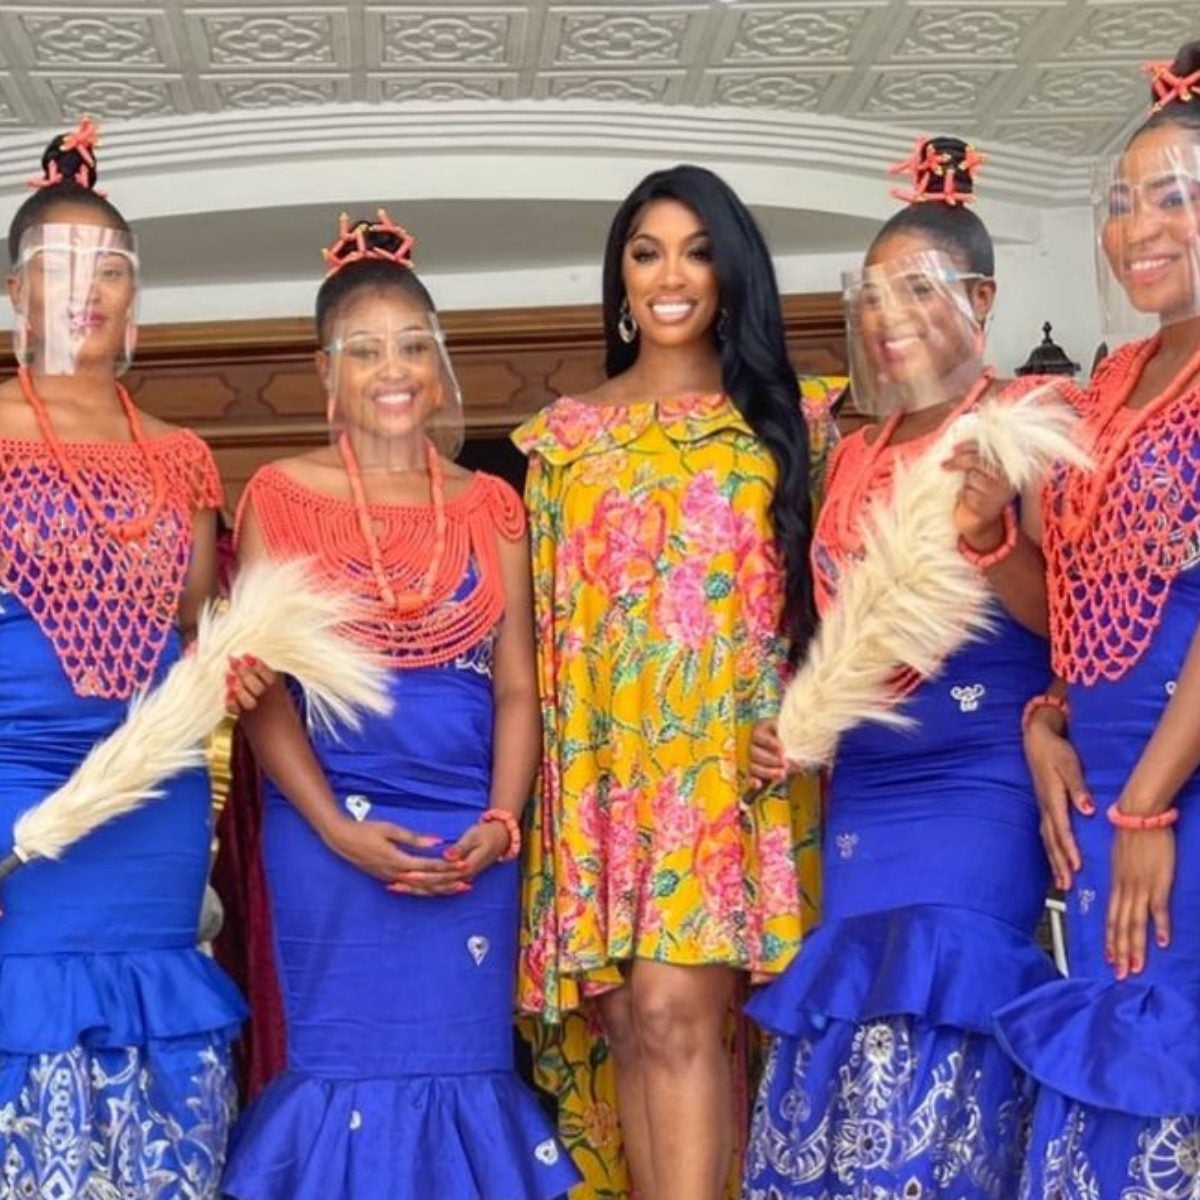 Porsha Williams And Her Fiancé Traveled to His Hometown In Nigeria And Received A Royal Welcome: 'What An Experience'